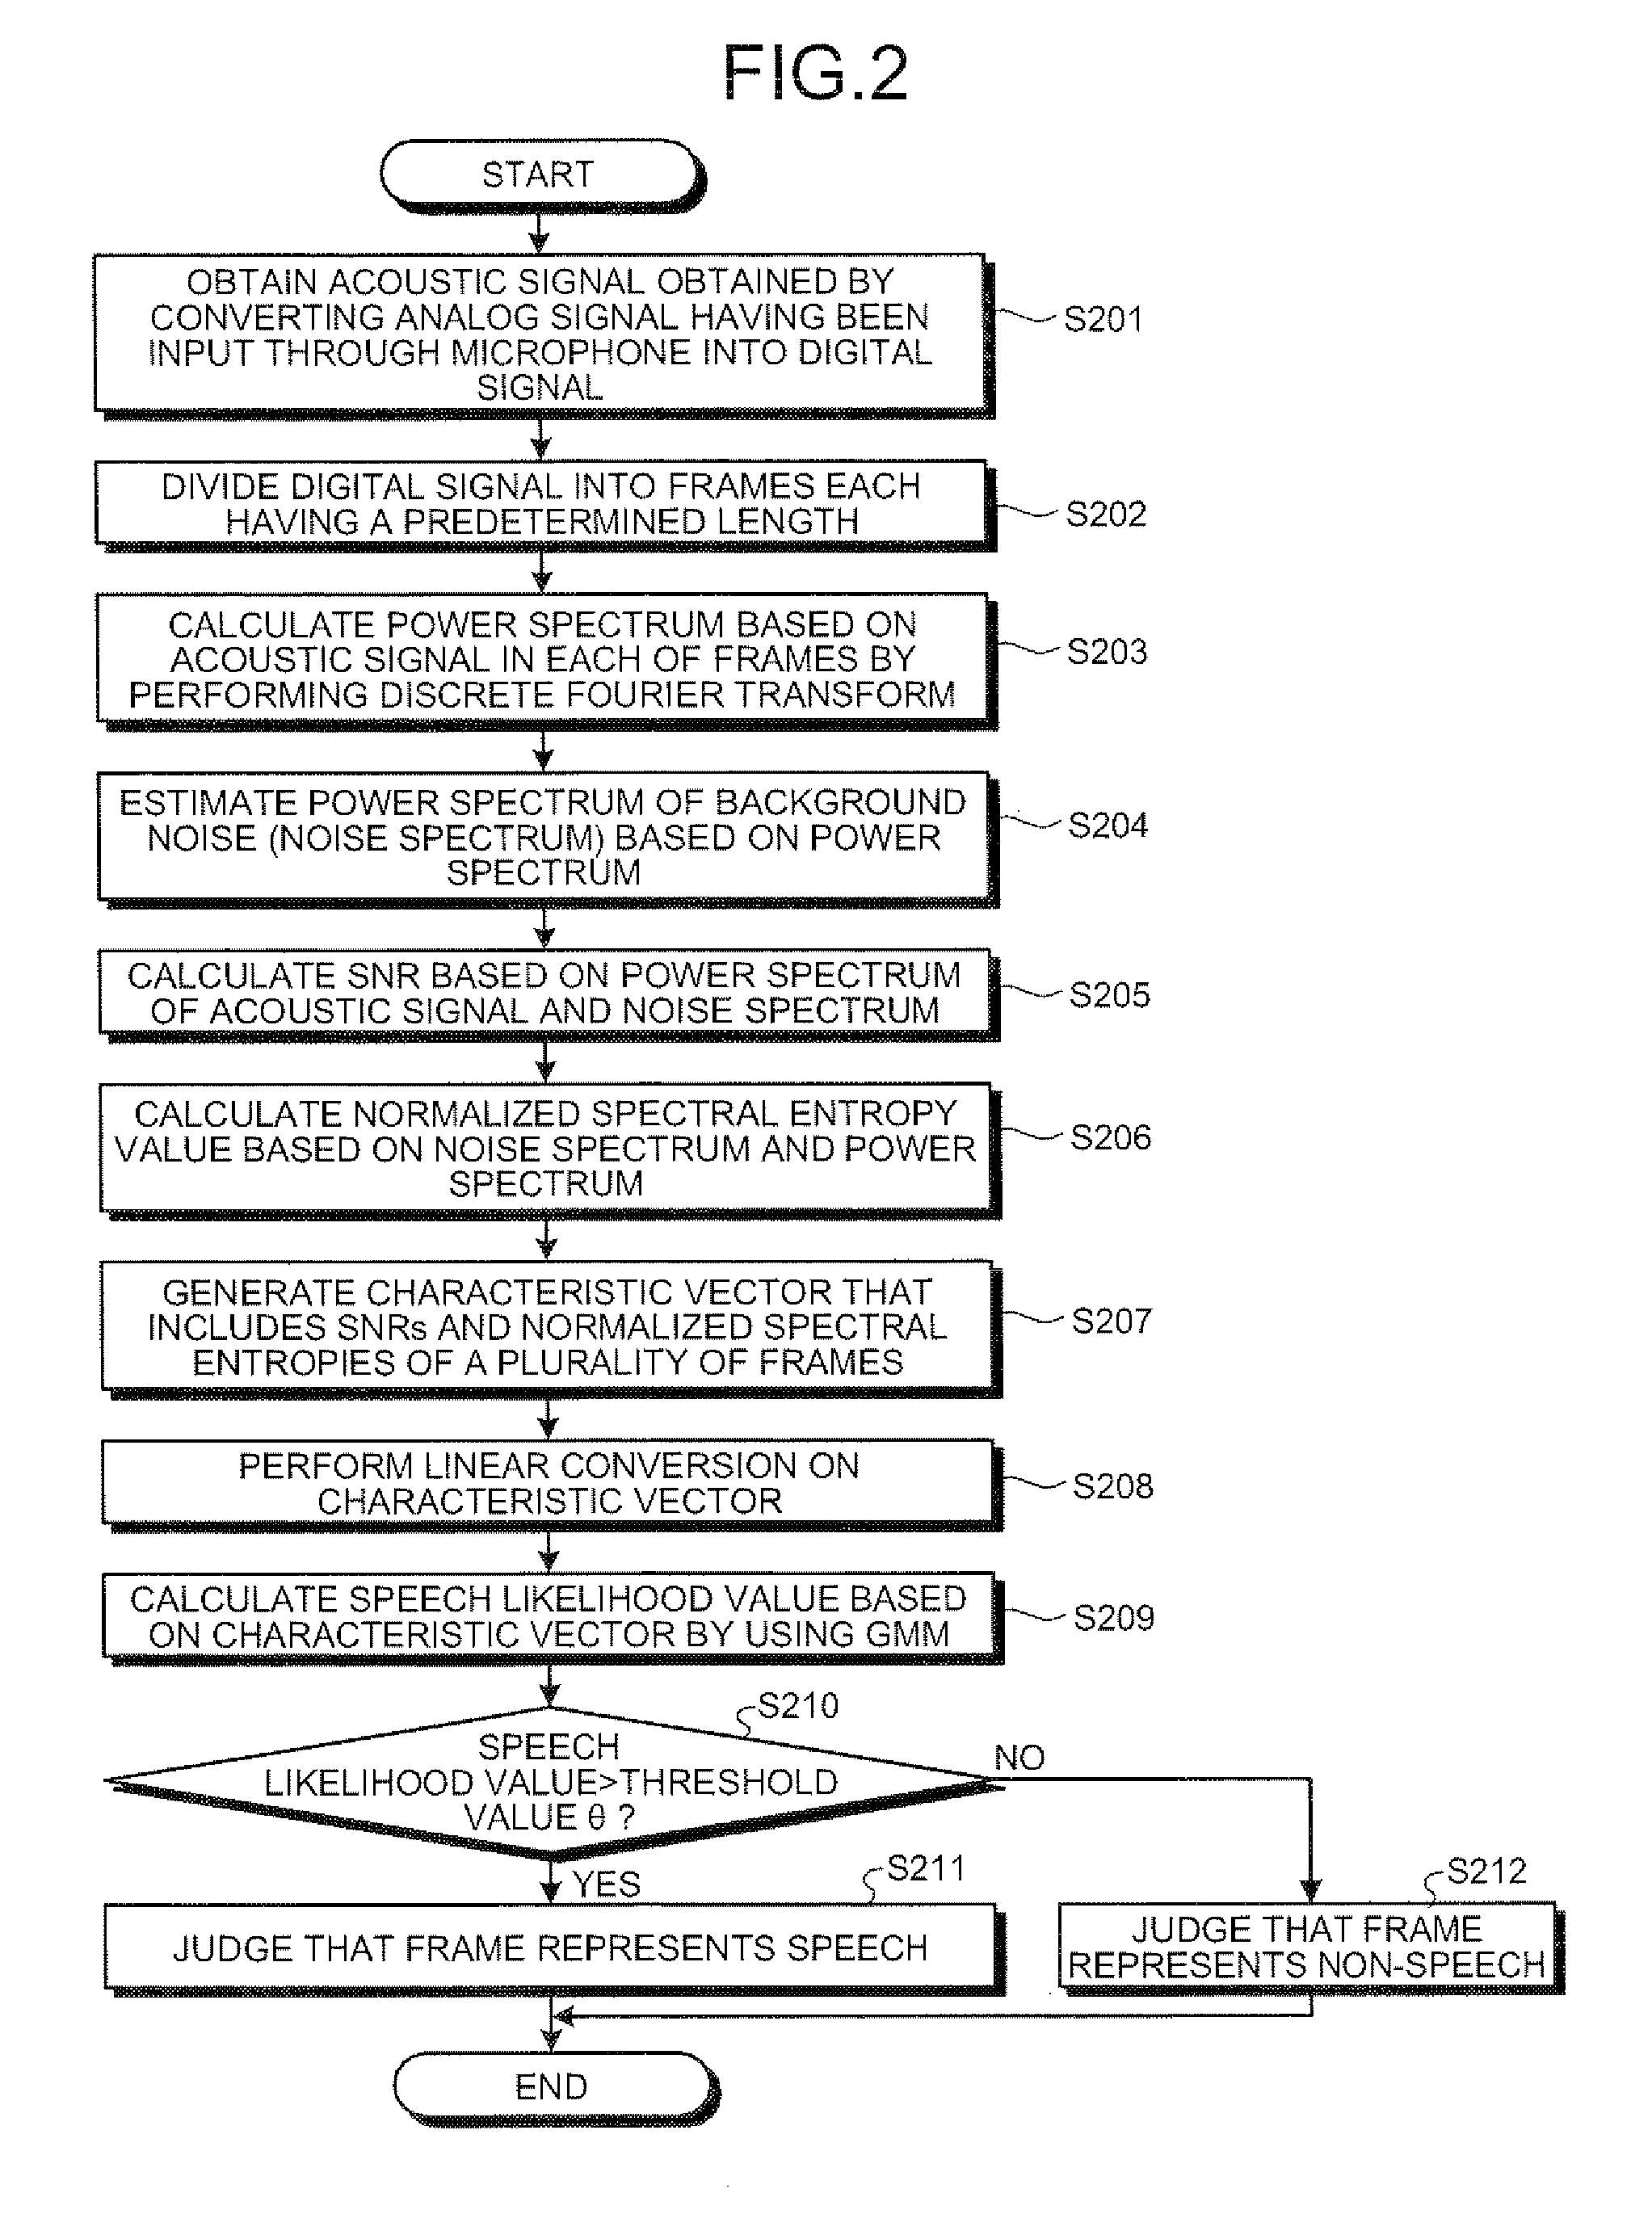 Apparatus, method, and computer program product for judging speech/non-speech